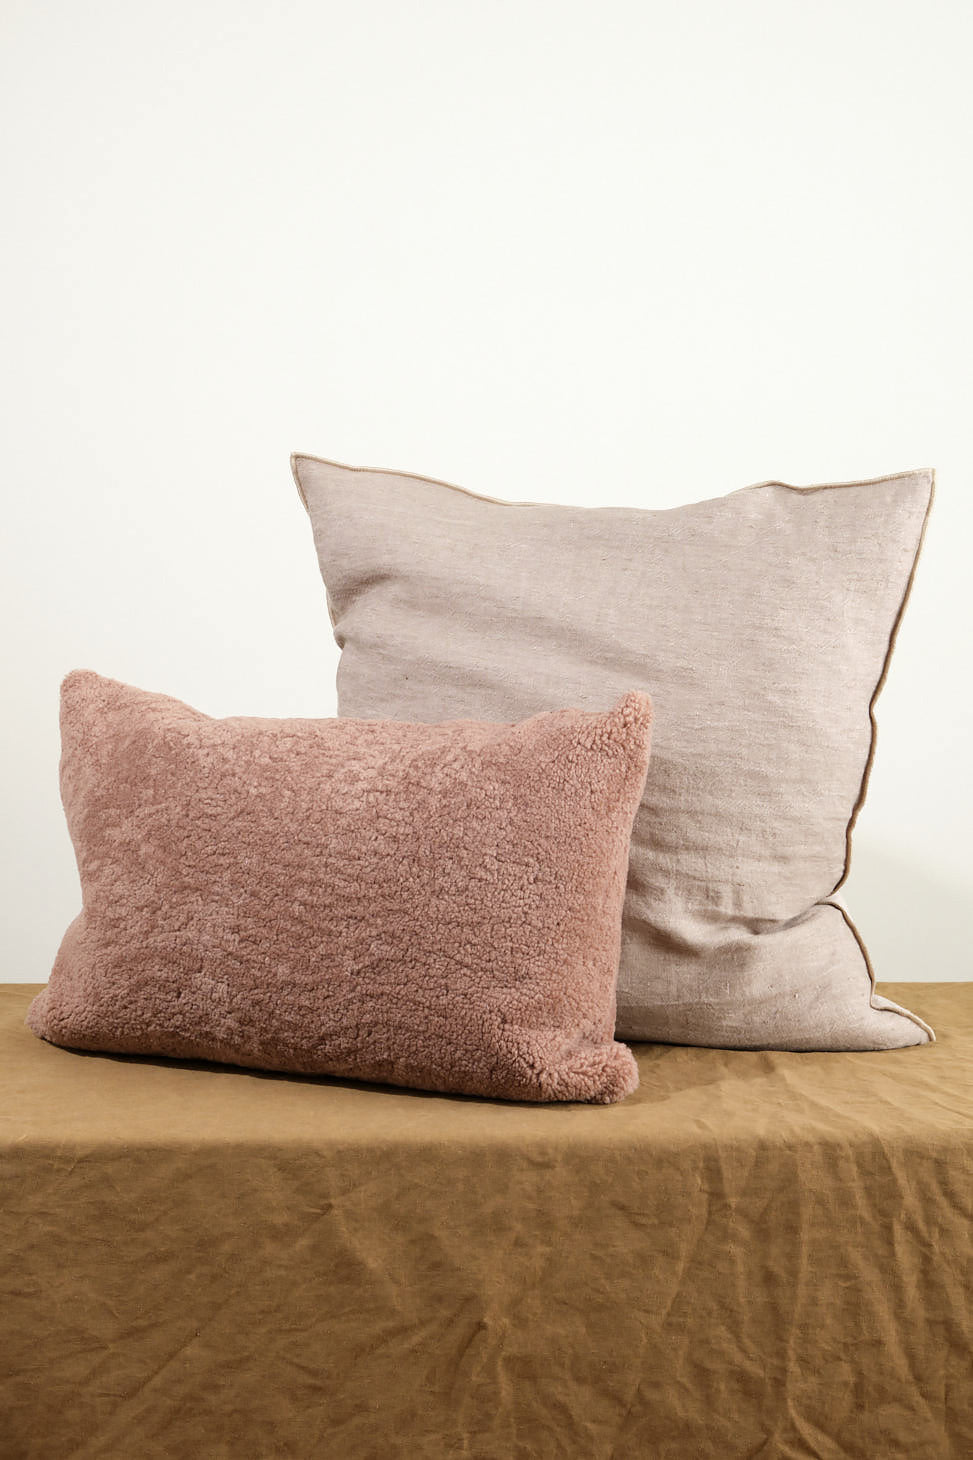 26" X 26" Crumpled Washed Linen Vice Versa Cushion in Taupe